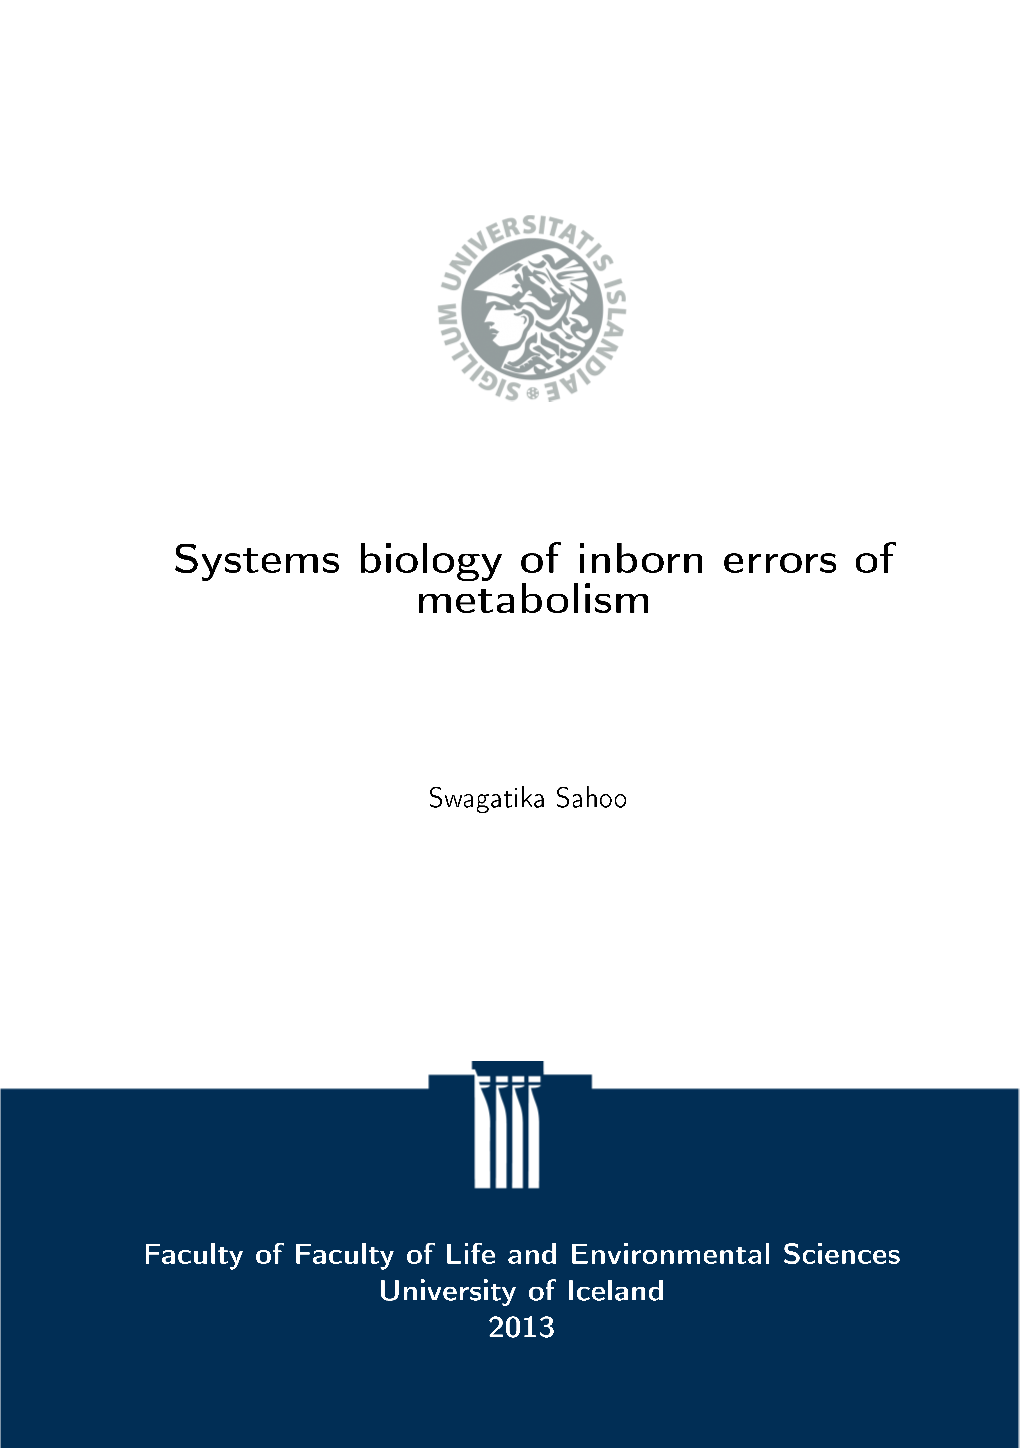 Systems Biology of Inborn Errors of Metabolism